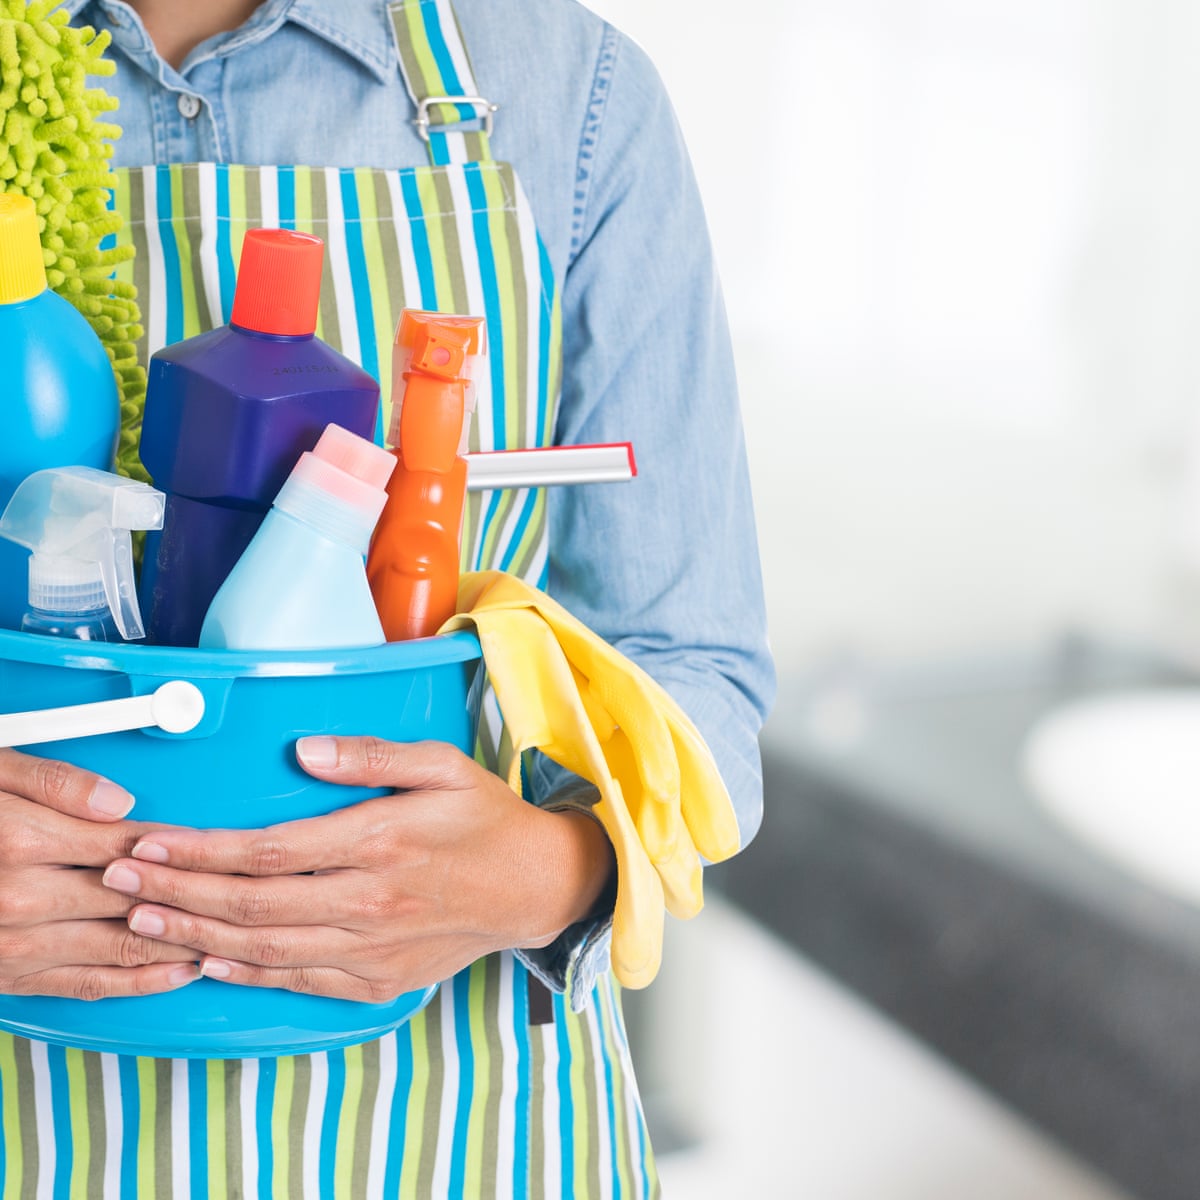 Guilt over household chores is 'harming working women's health